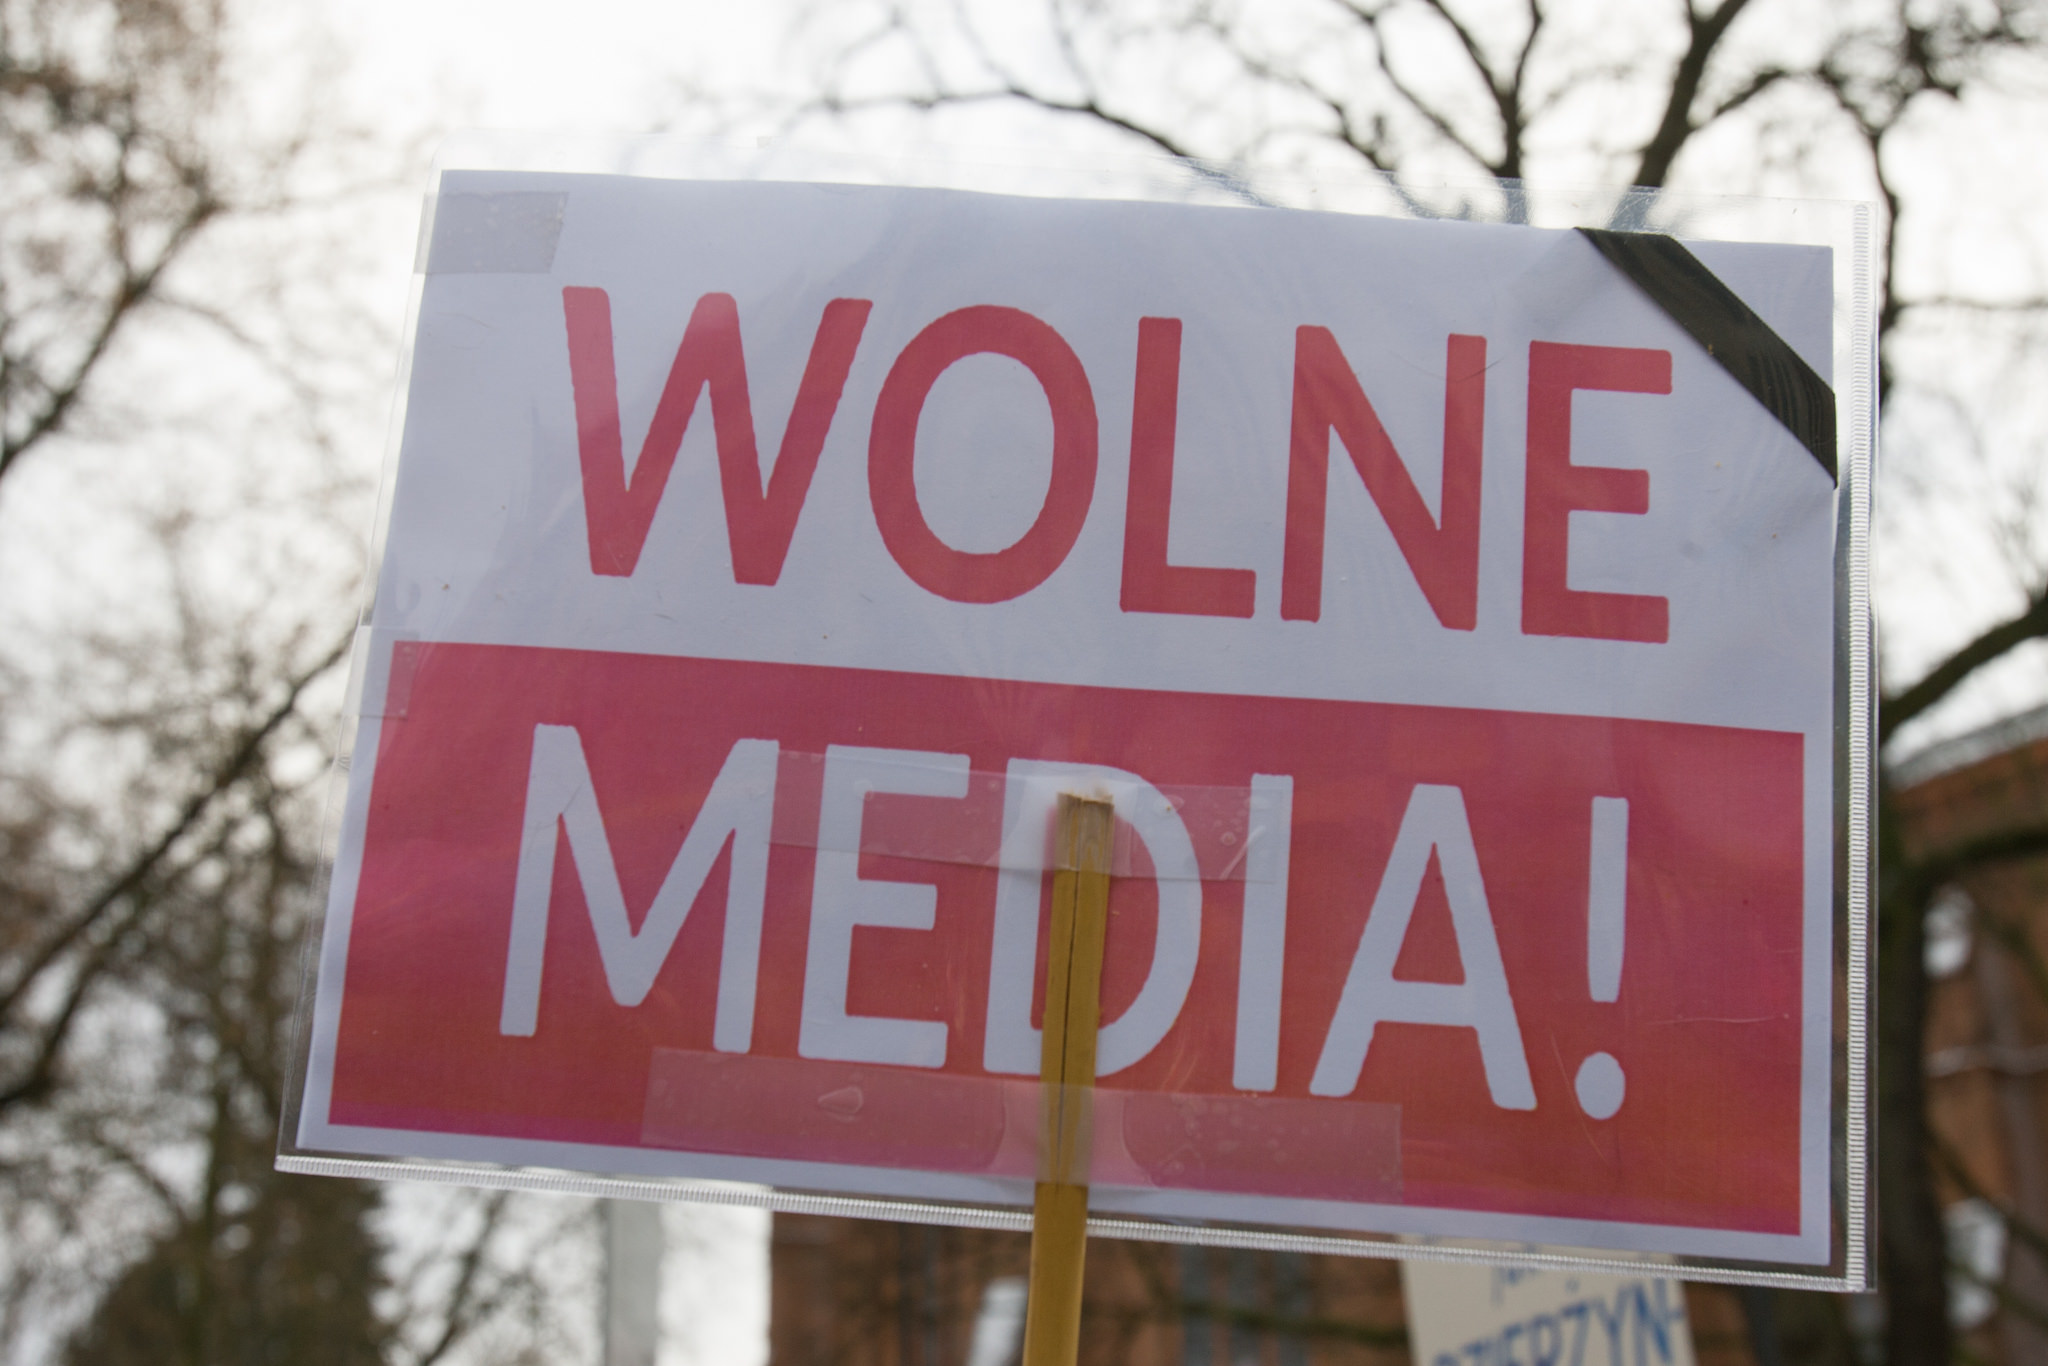 Sign used to protest for "Free media" at protests in Poland in January. Image: Jaap Arriens/Creative Commons